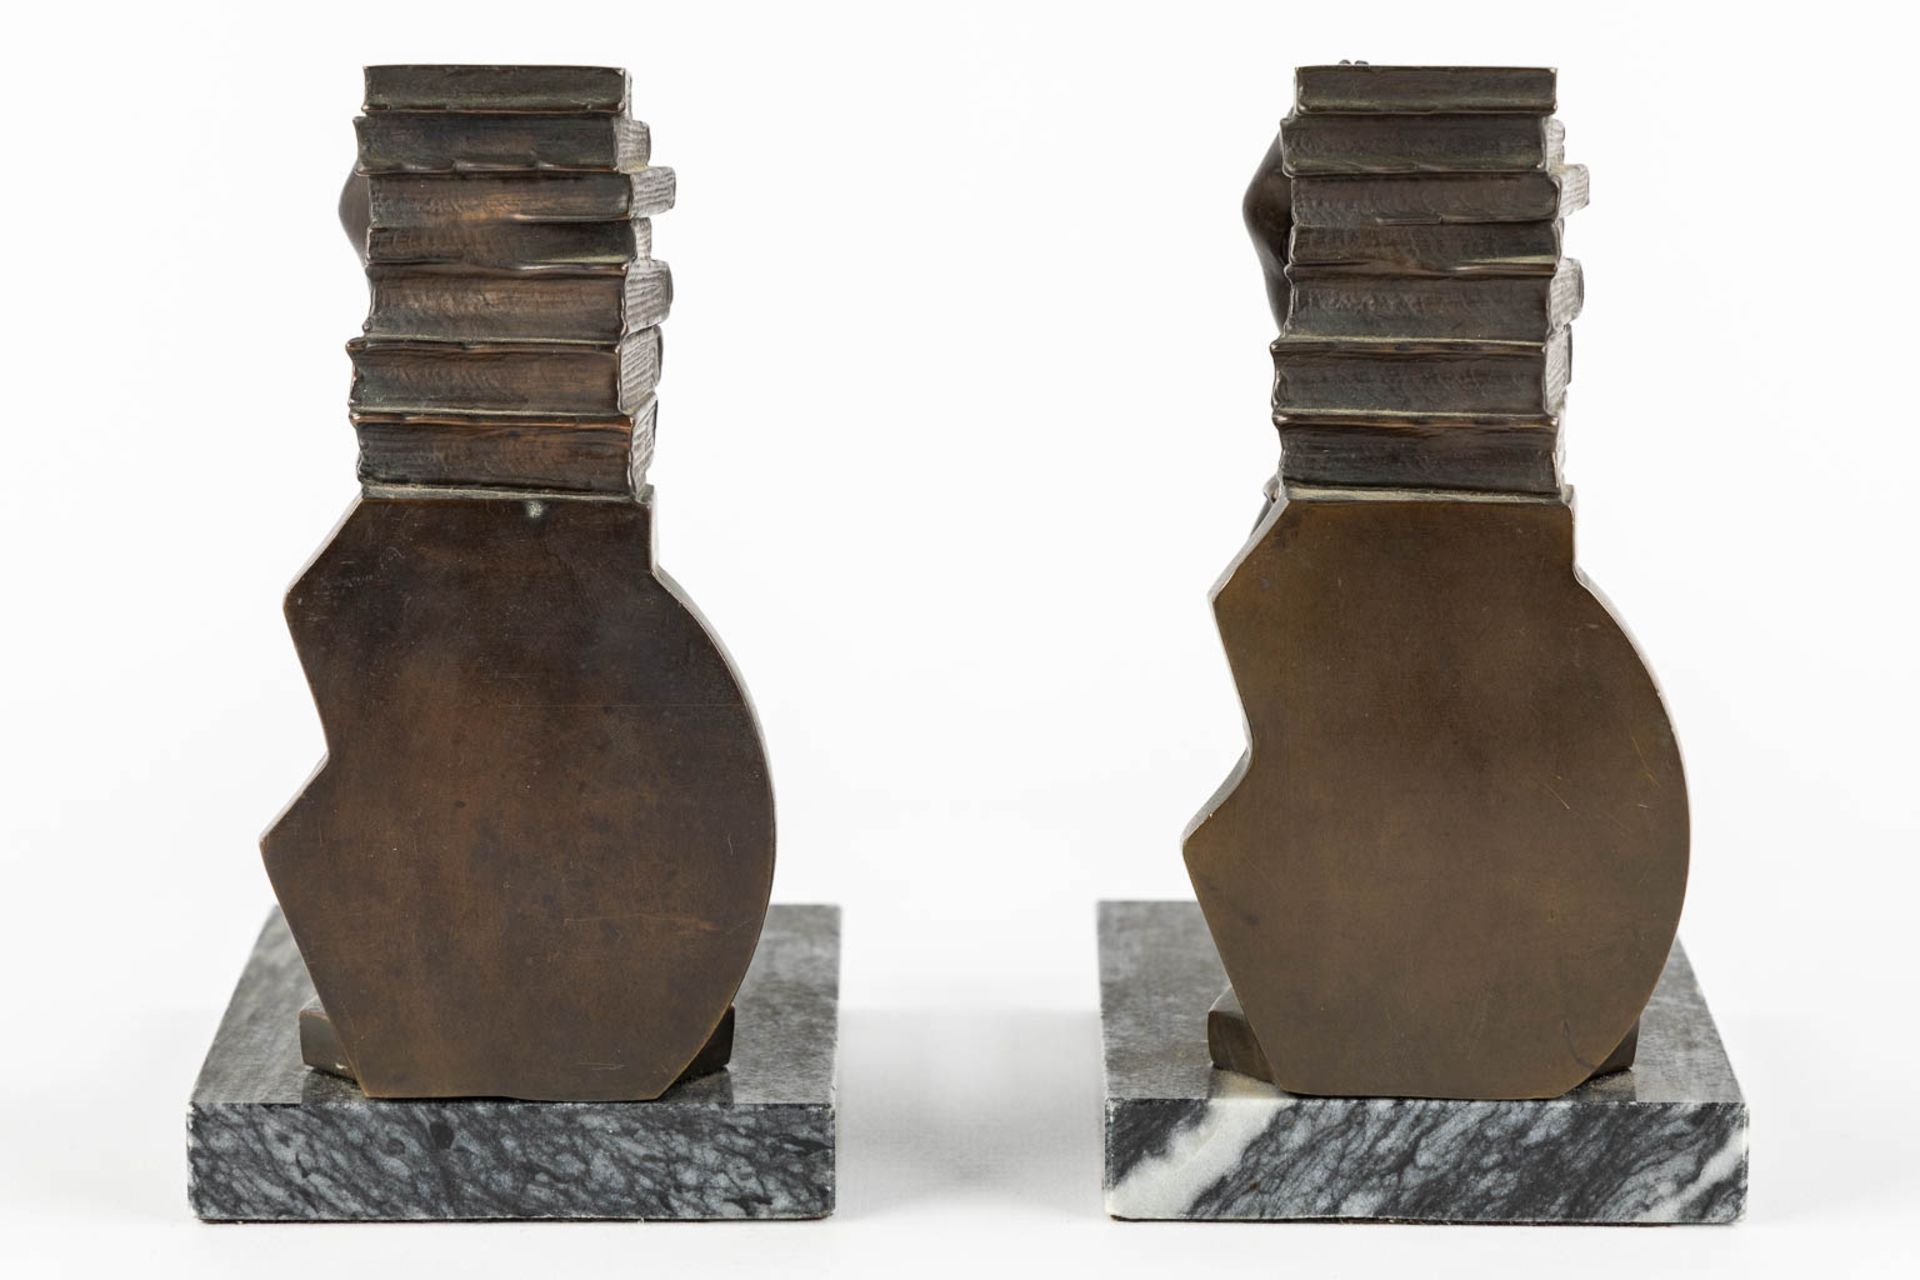 A pair of bronze 'book ends', patinated bronze mounted on marble. Circa 1920. (L:10 x W:12 x H:17 cm - Image 4 of 10